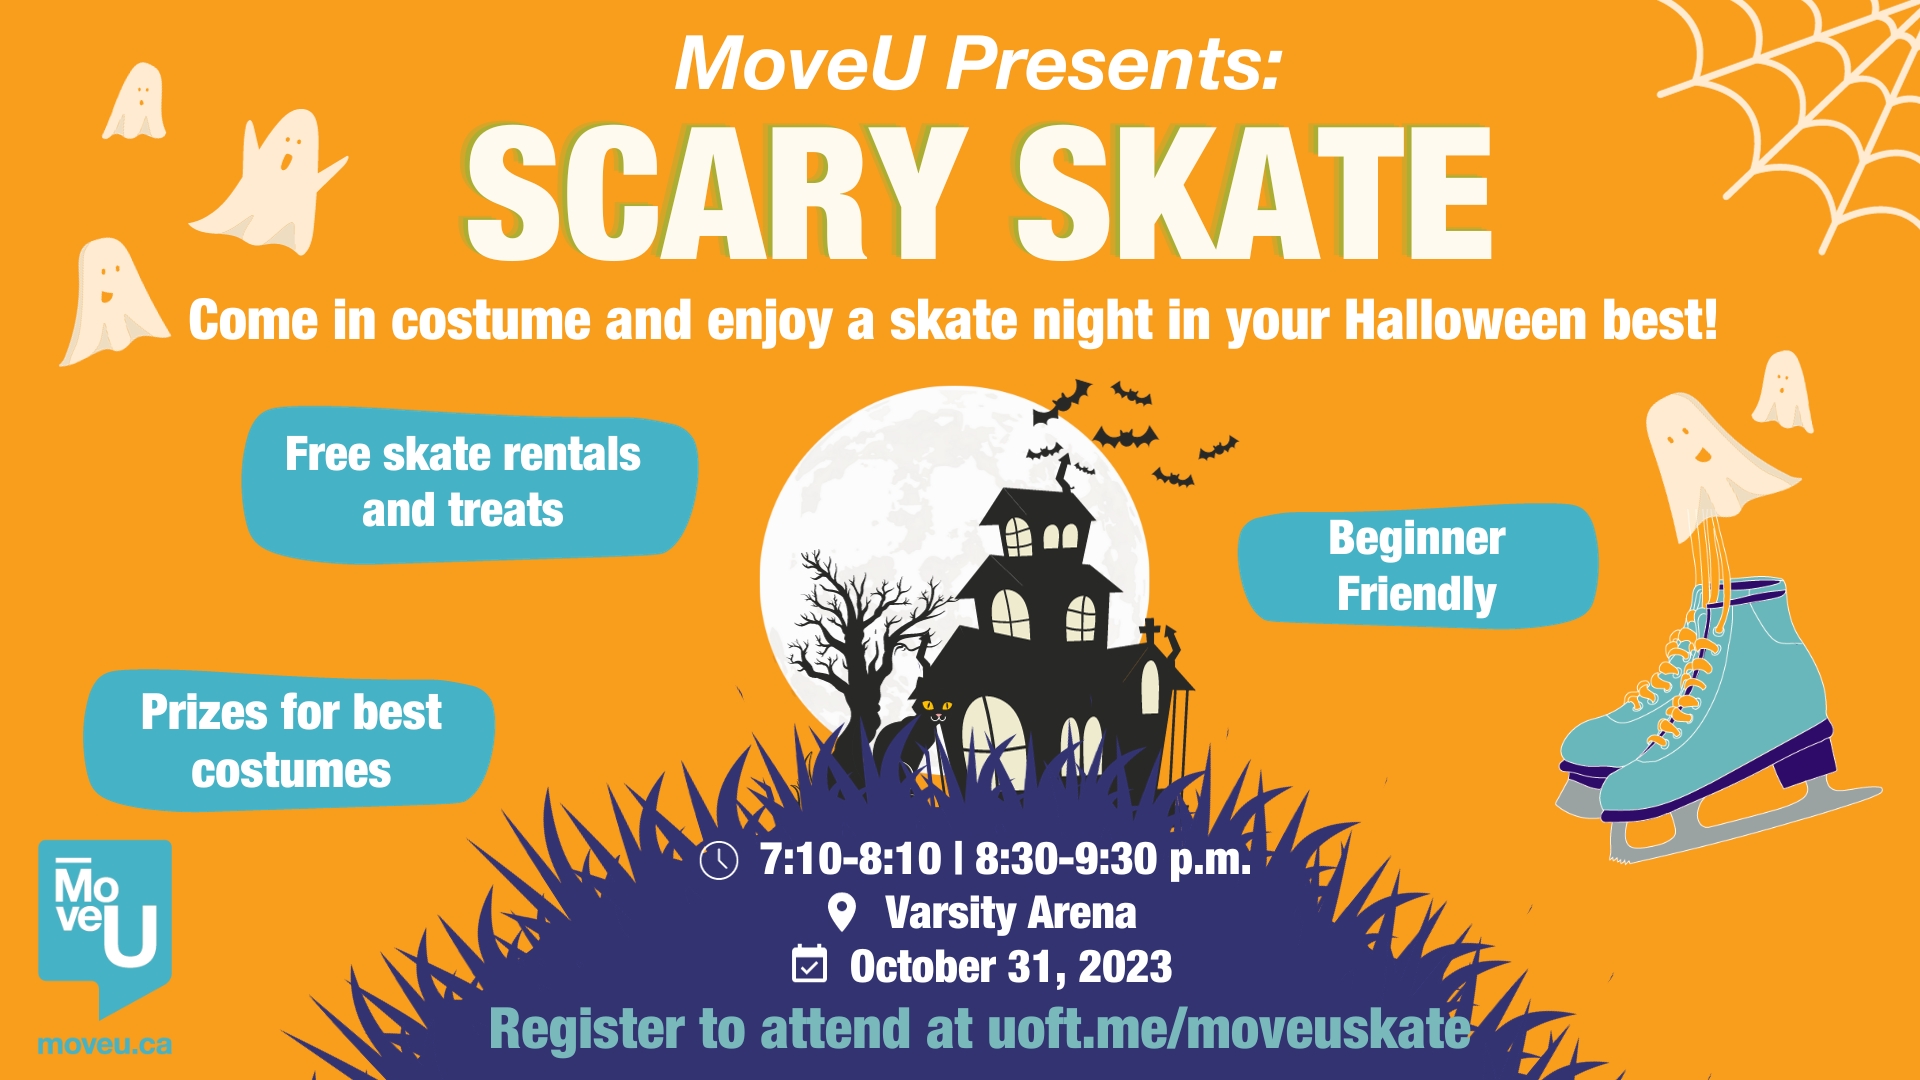 Scary Skate October 31, 2023 - Come in your costume and enjoy a halloween skate in your halloween best!